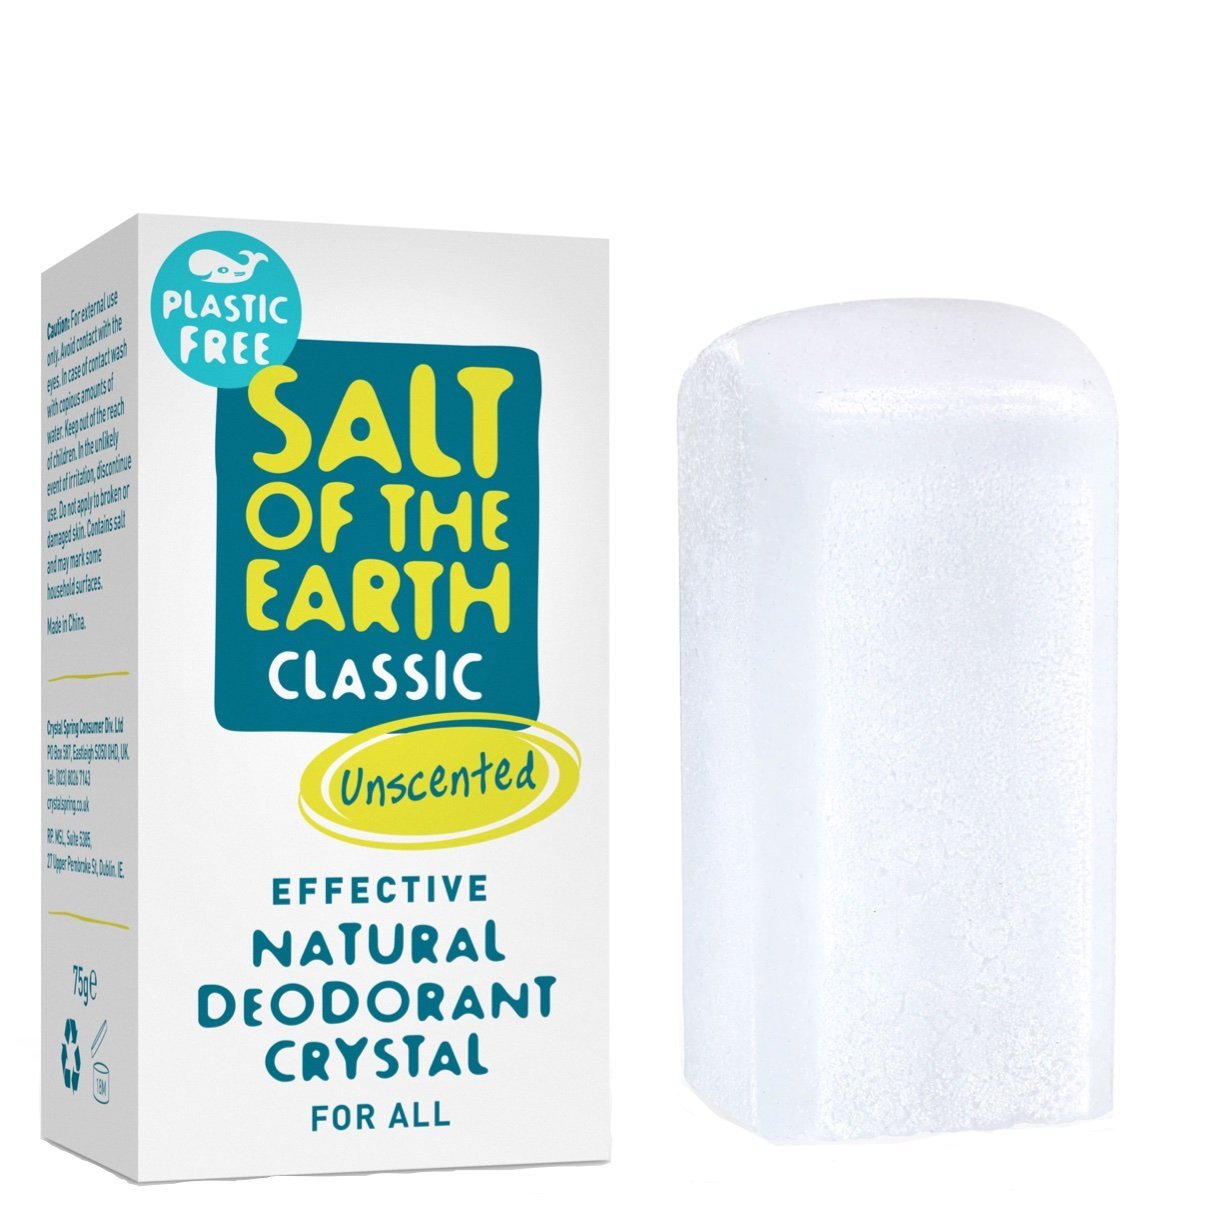 Which? recommends Salt of the Earth Plastic Free deodorant in latest issue of Which? Magazine - Salt of the Earth Natural Deodorants